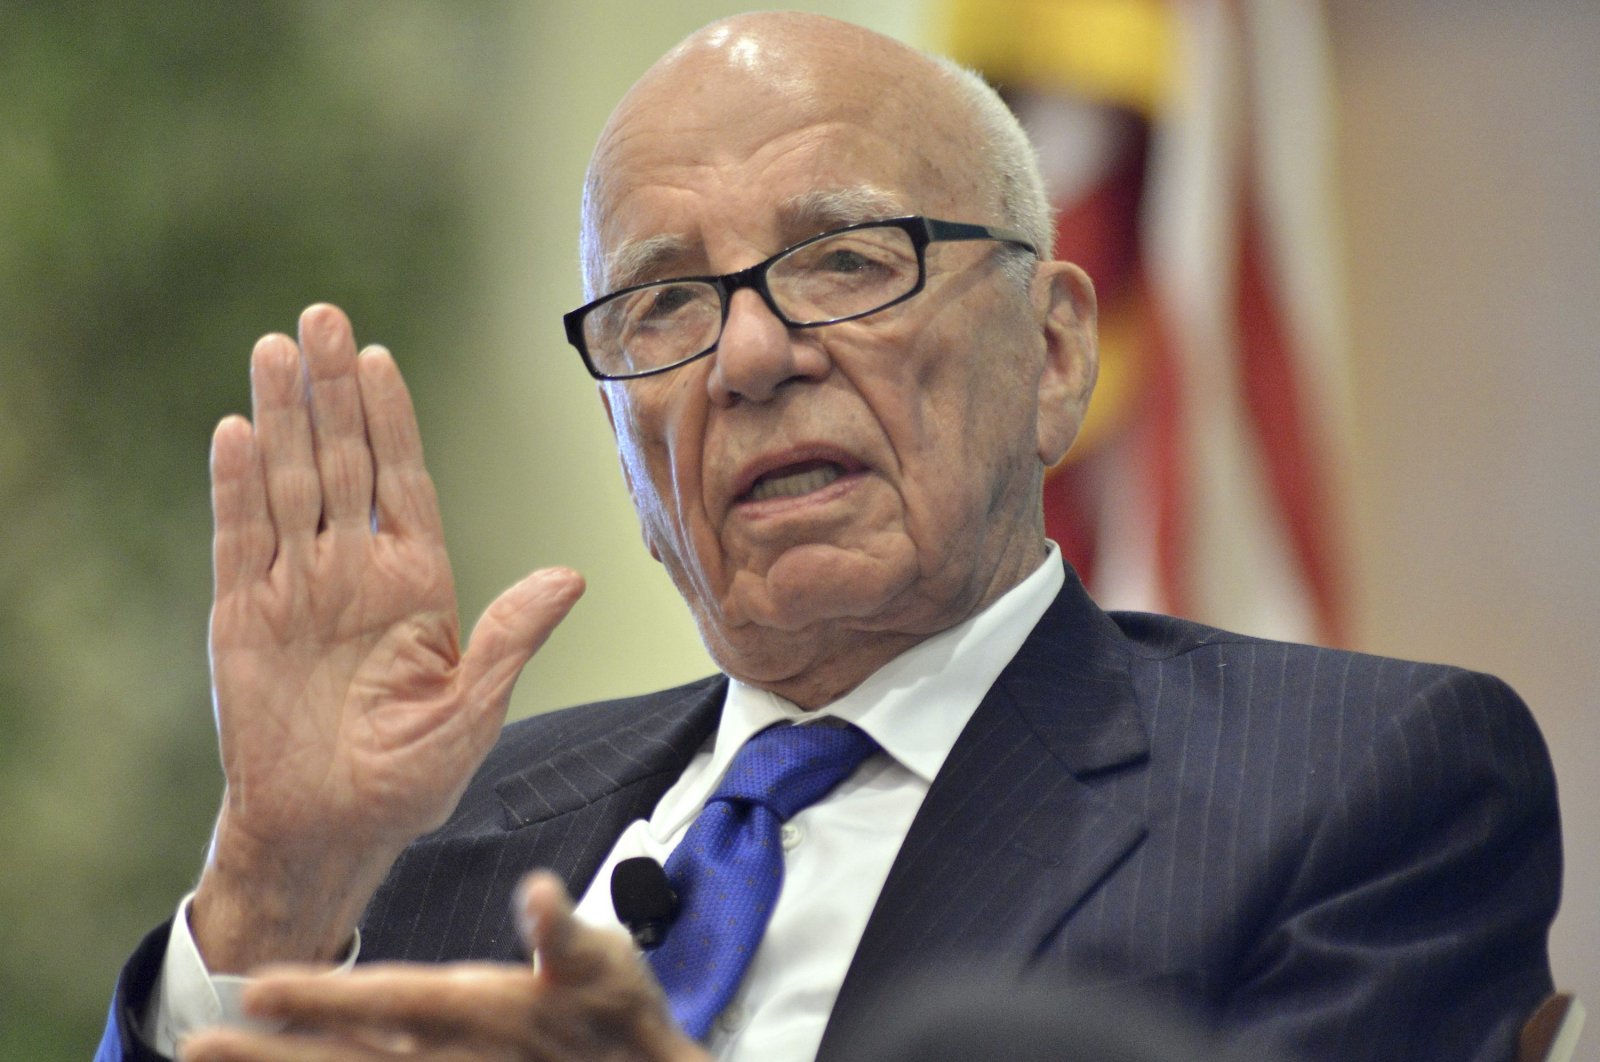 News Corporation CEO Rupert Murdoch speaks during a forum on The Economics and Politics of Immigration in Boston, Aug. 14, 2012. (AP Photo)